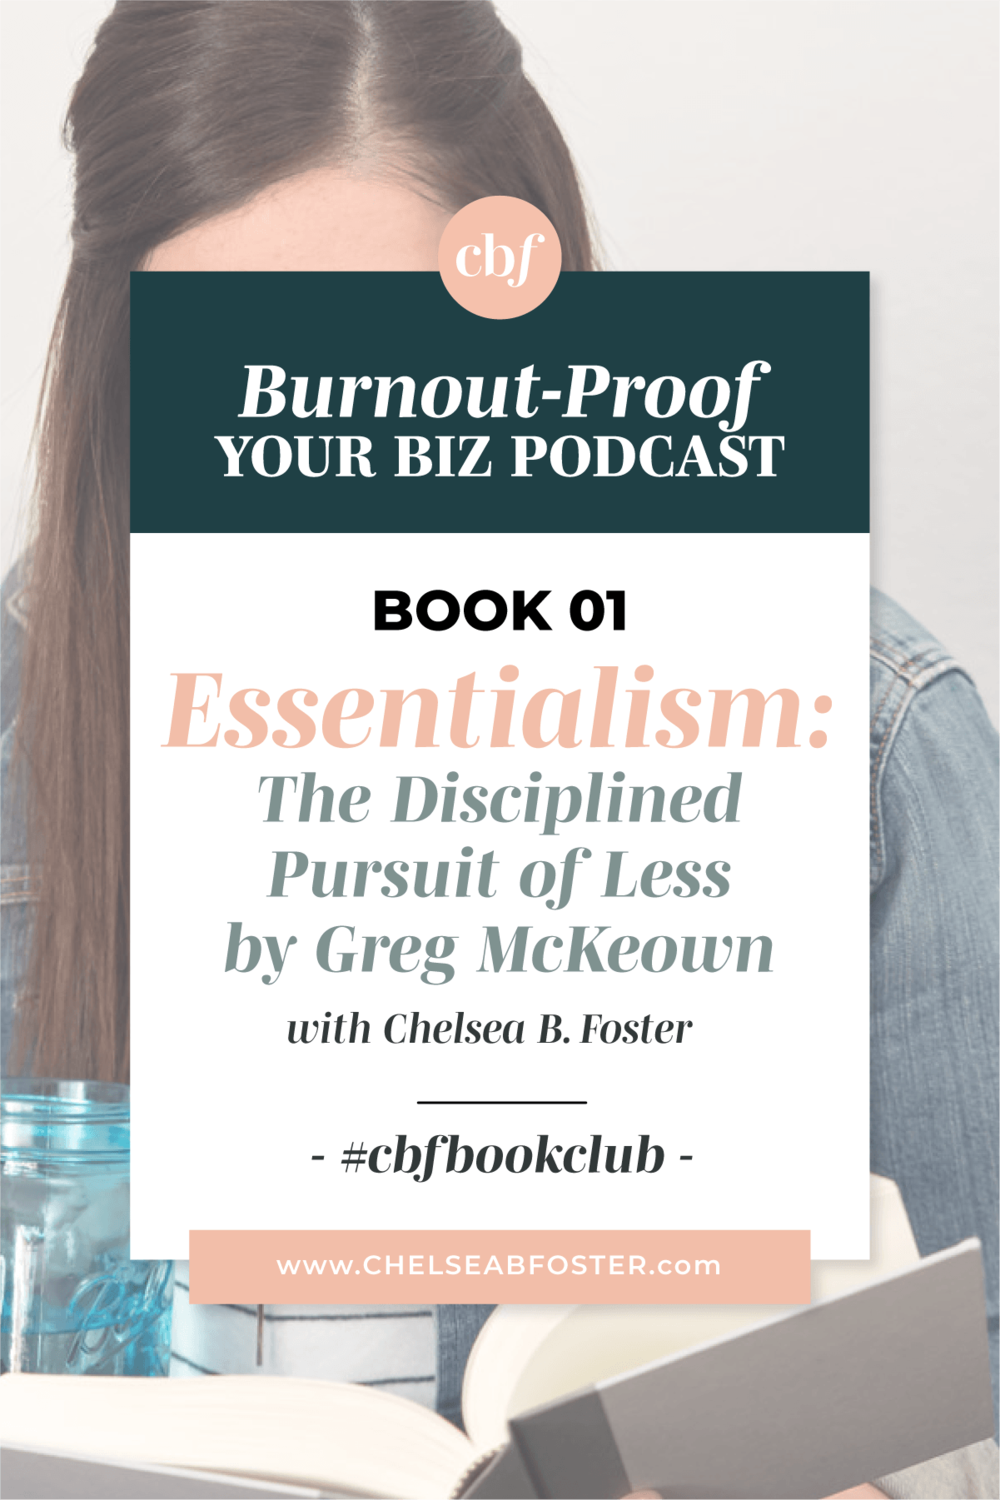 Burnout-Proof Your Biz with Chelsea B Foster | #cbfbookclub - Essentialism: The Disciplined Pursuit of Less by Greg McKeown. Download your reading guide now at www.chelseabfoster.com/cbfbookclub